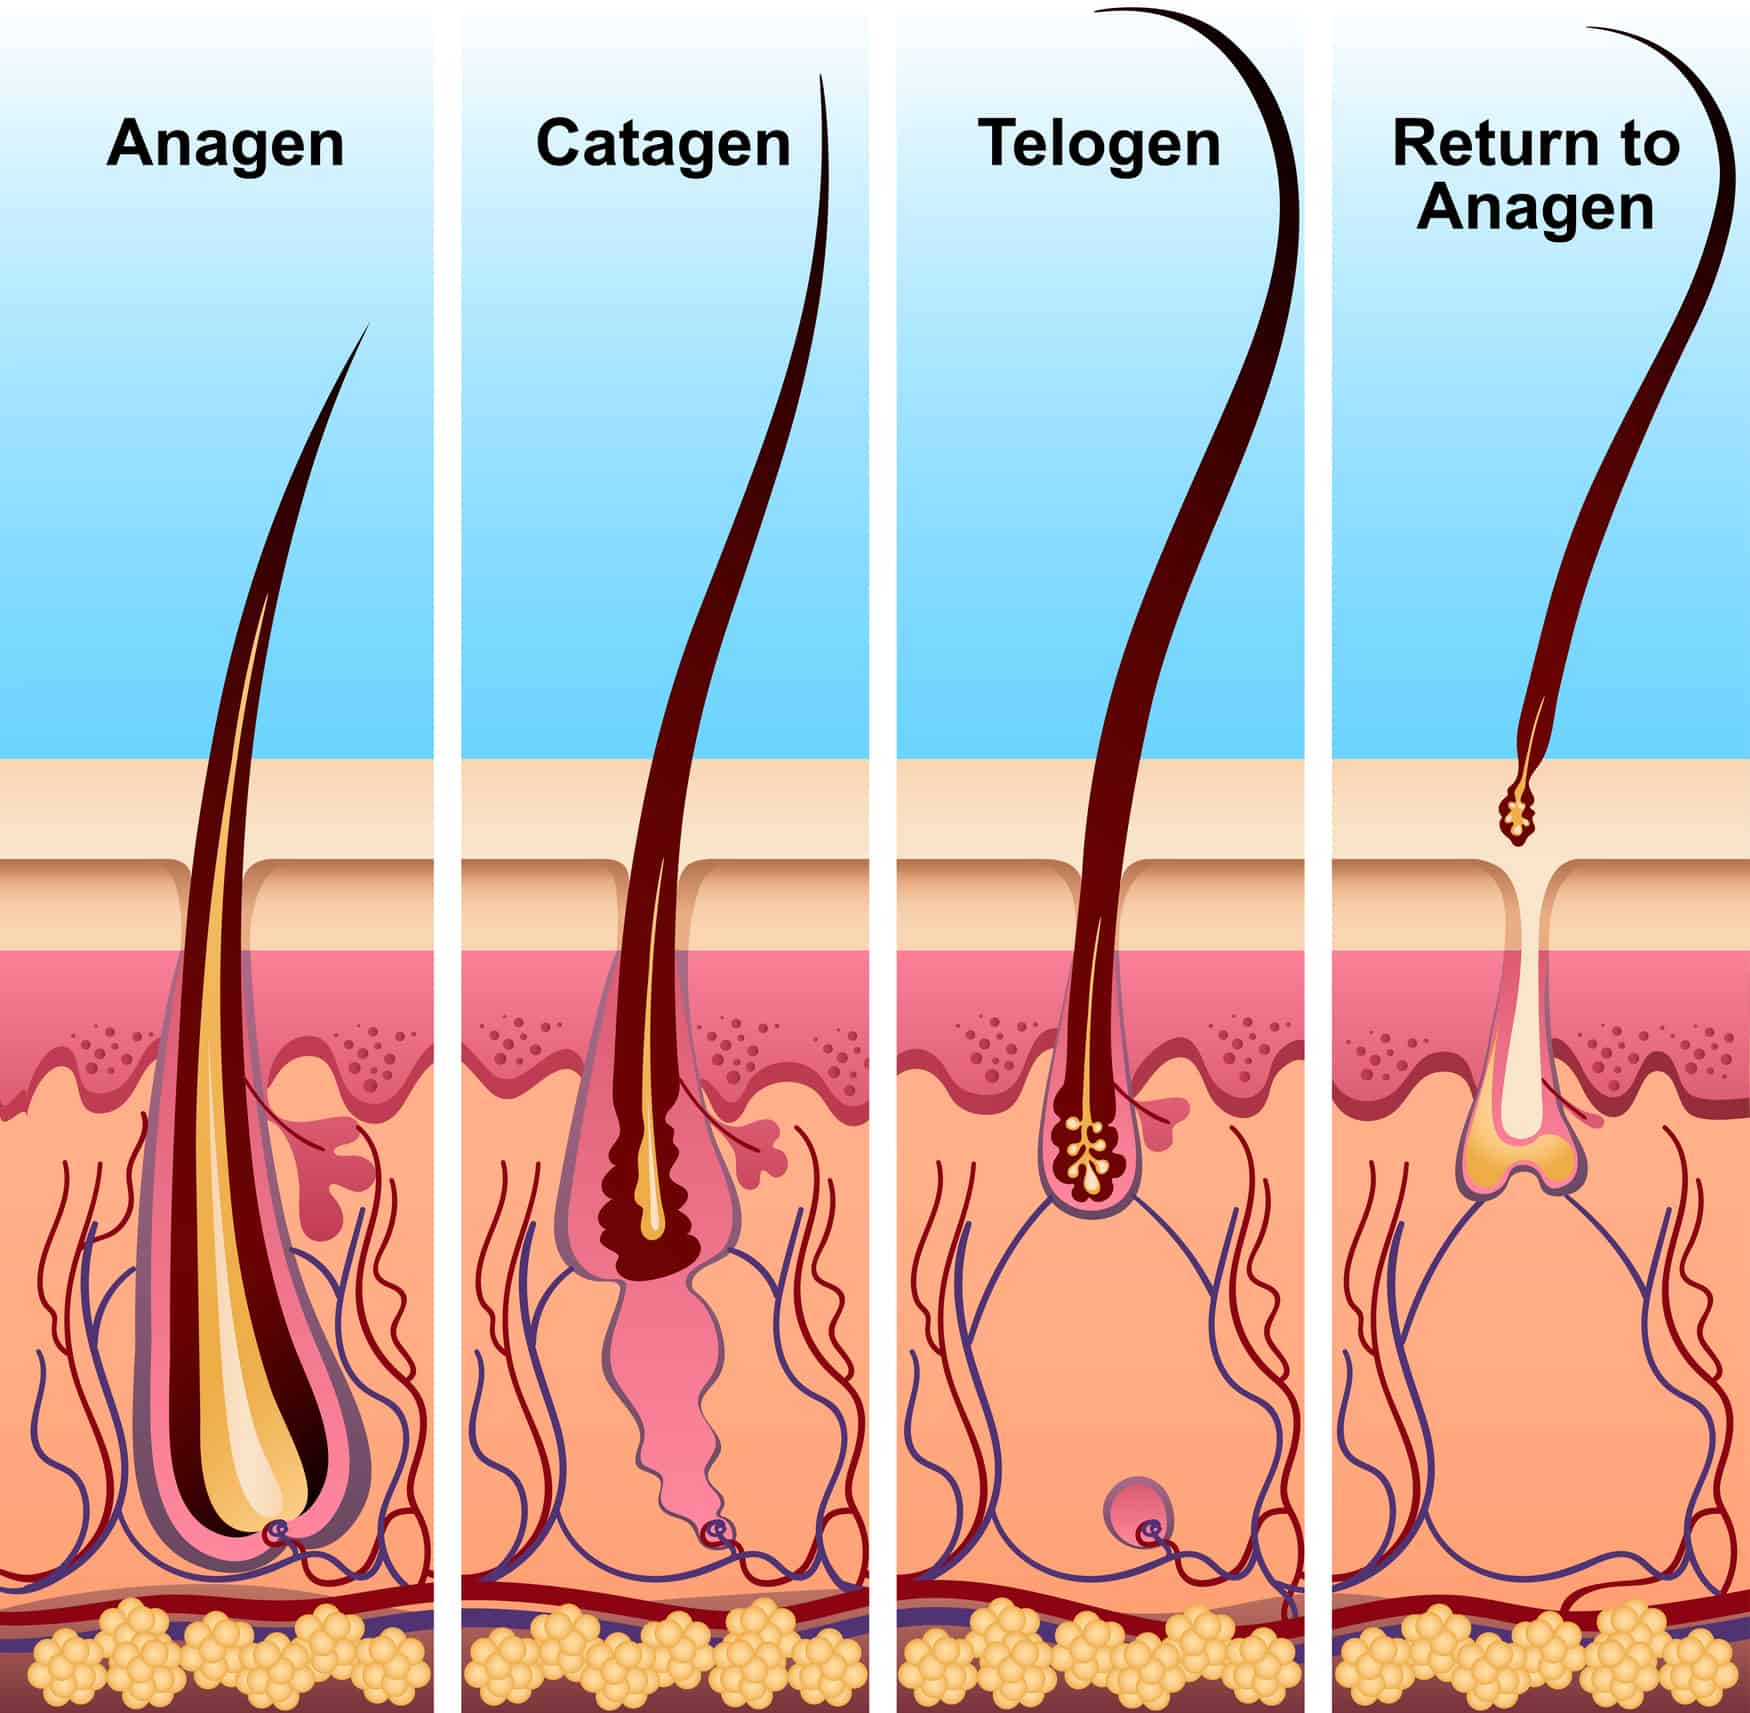 Image ID: Depiction of the hair growth cycle. It starts with an image of a large follicle, connected to small veins that are carrying nutrients to it, with a hair coming out of it, labeled Anagen; and then there's a section where the follicle has shrunk and moved closer to the surface of the scalp, labeled Catagen; this is followed by an image of the follicle no longer connected to veins, now smaller than before, with the hair beginning to disconnect from the follicle, labeled Telogen; and finally the fourth section shows the hair sitting in the surface of the scalp, no longer in the follicle at all, labeled "Return to Anagen." End ID. 